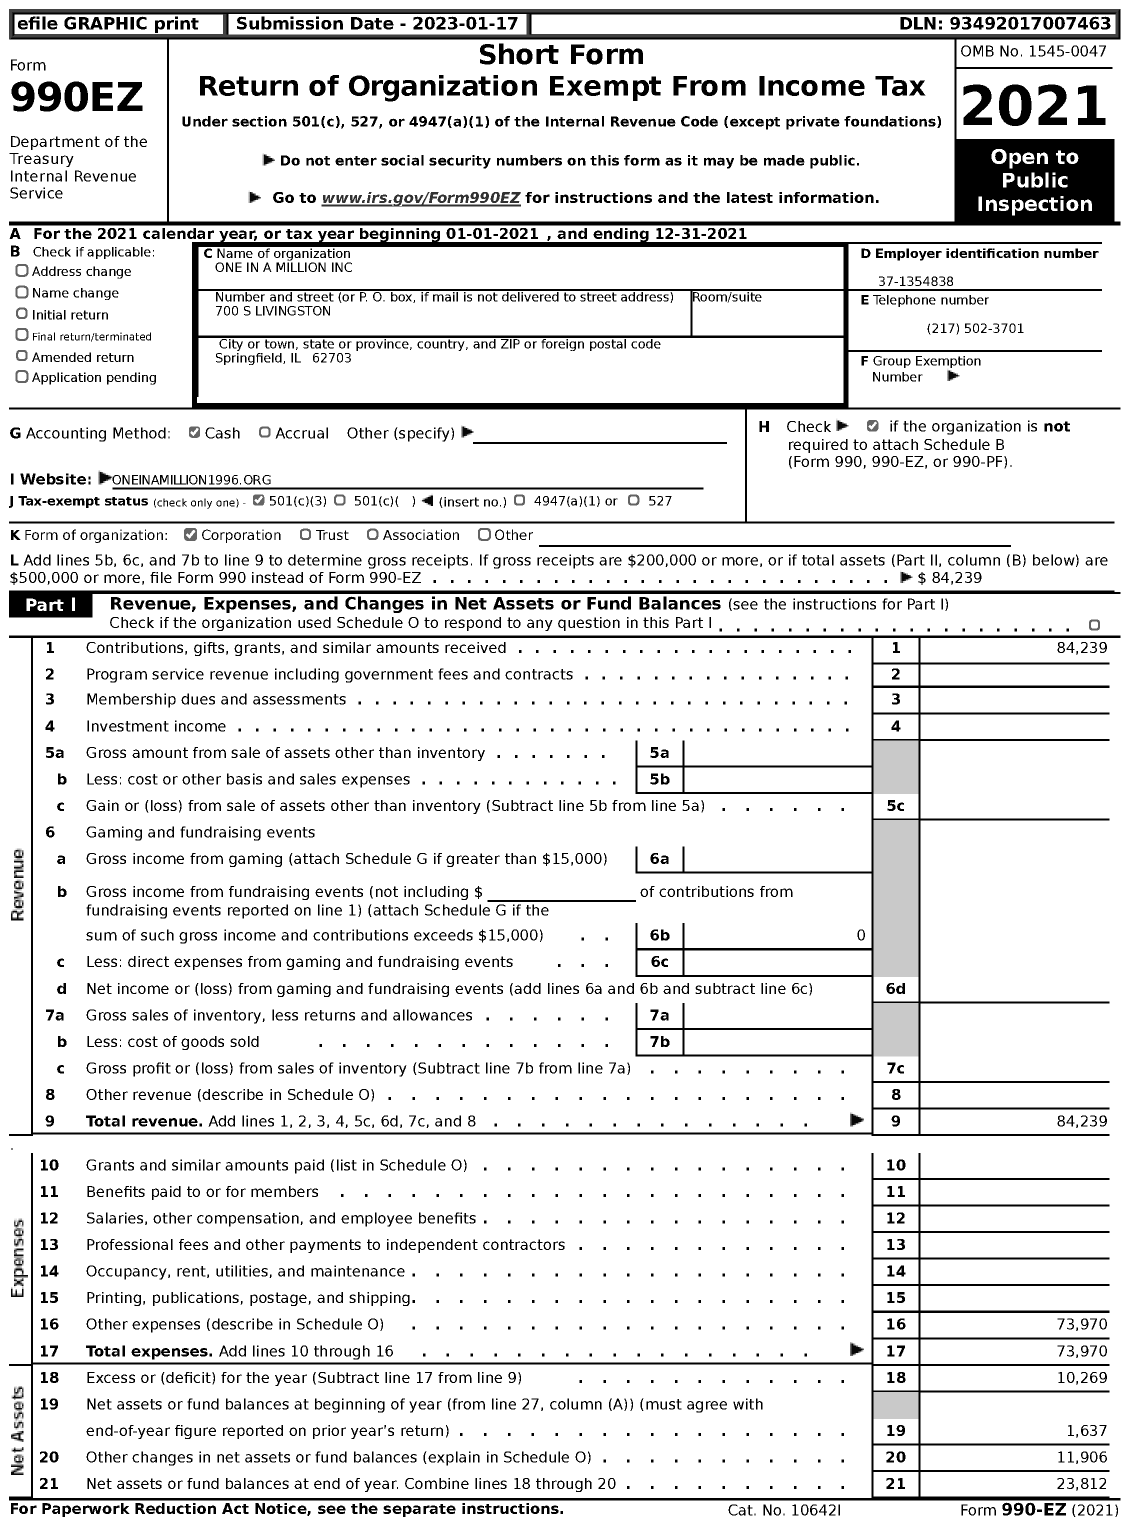 Image of first page of 2021 Form 990EZ for One in A Million